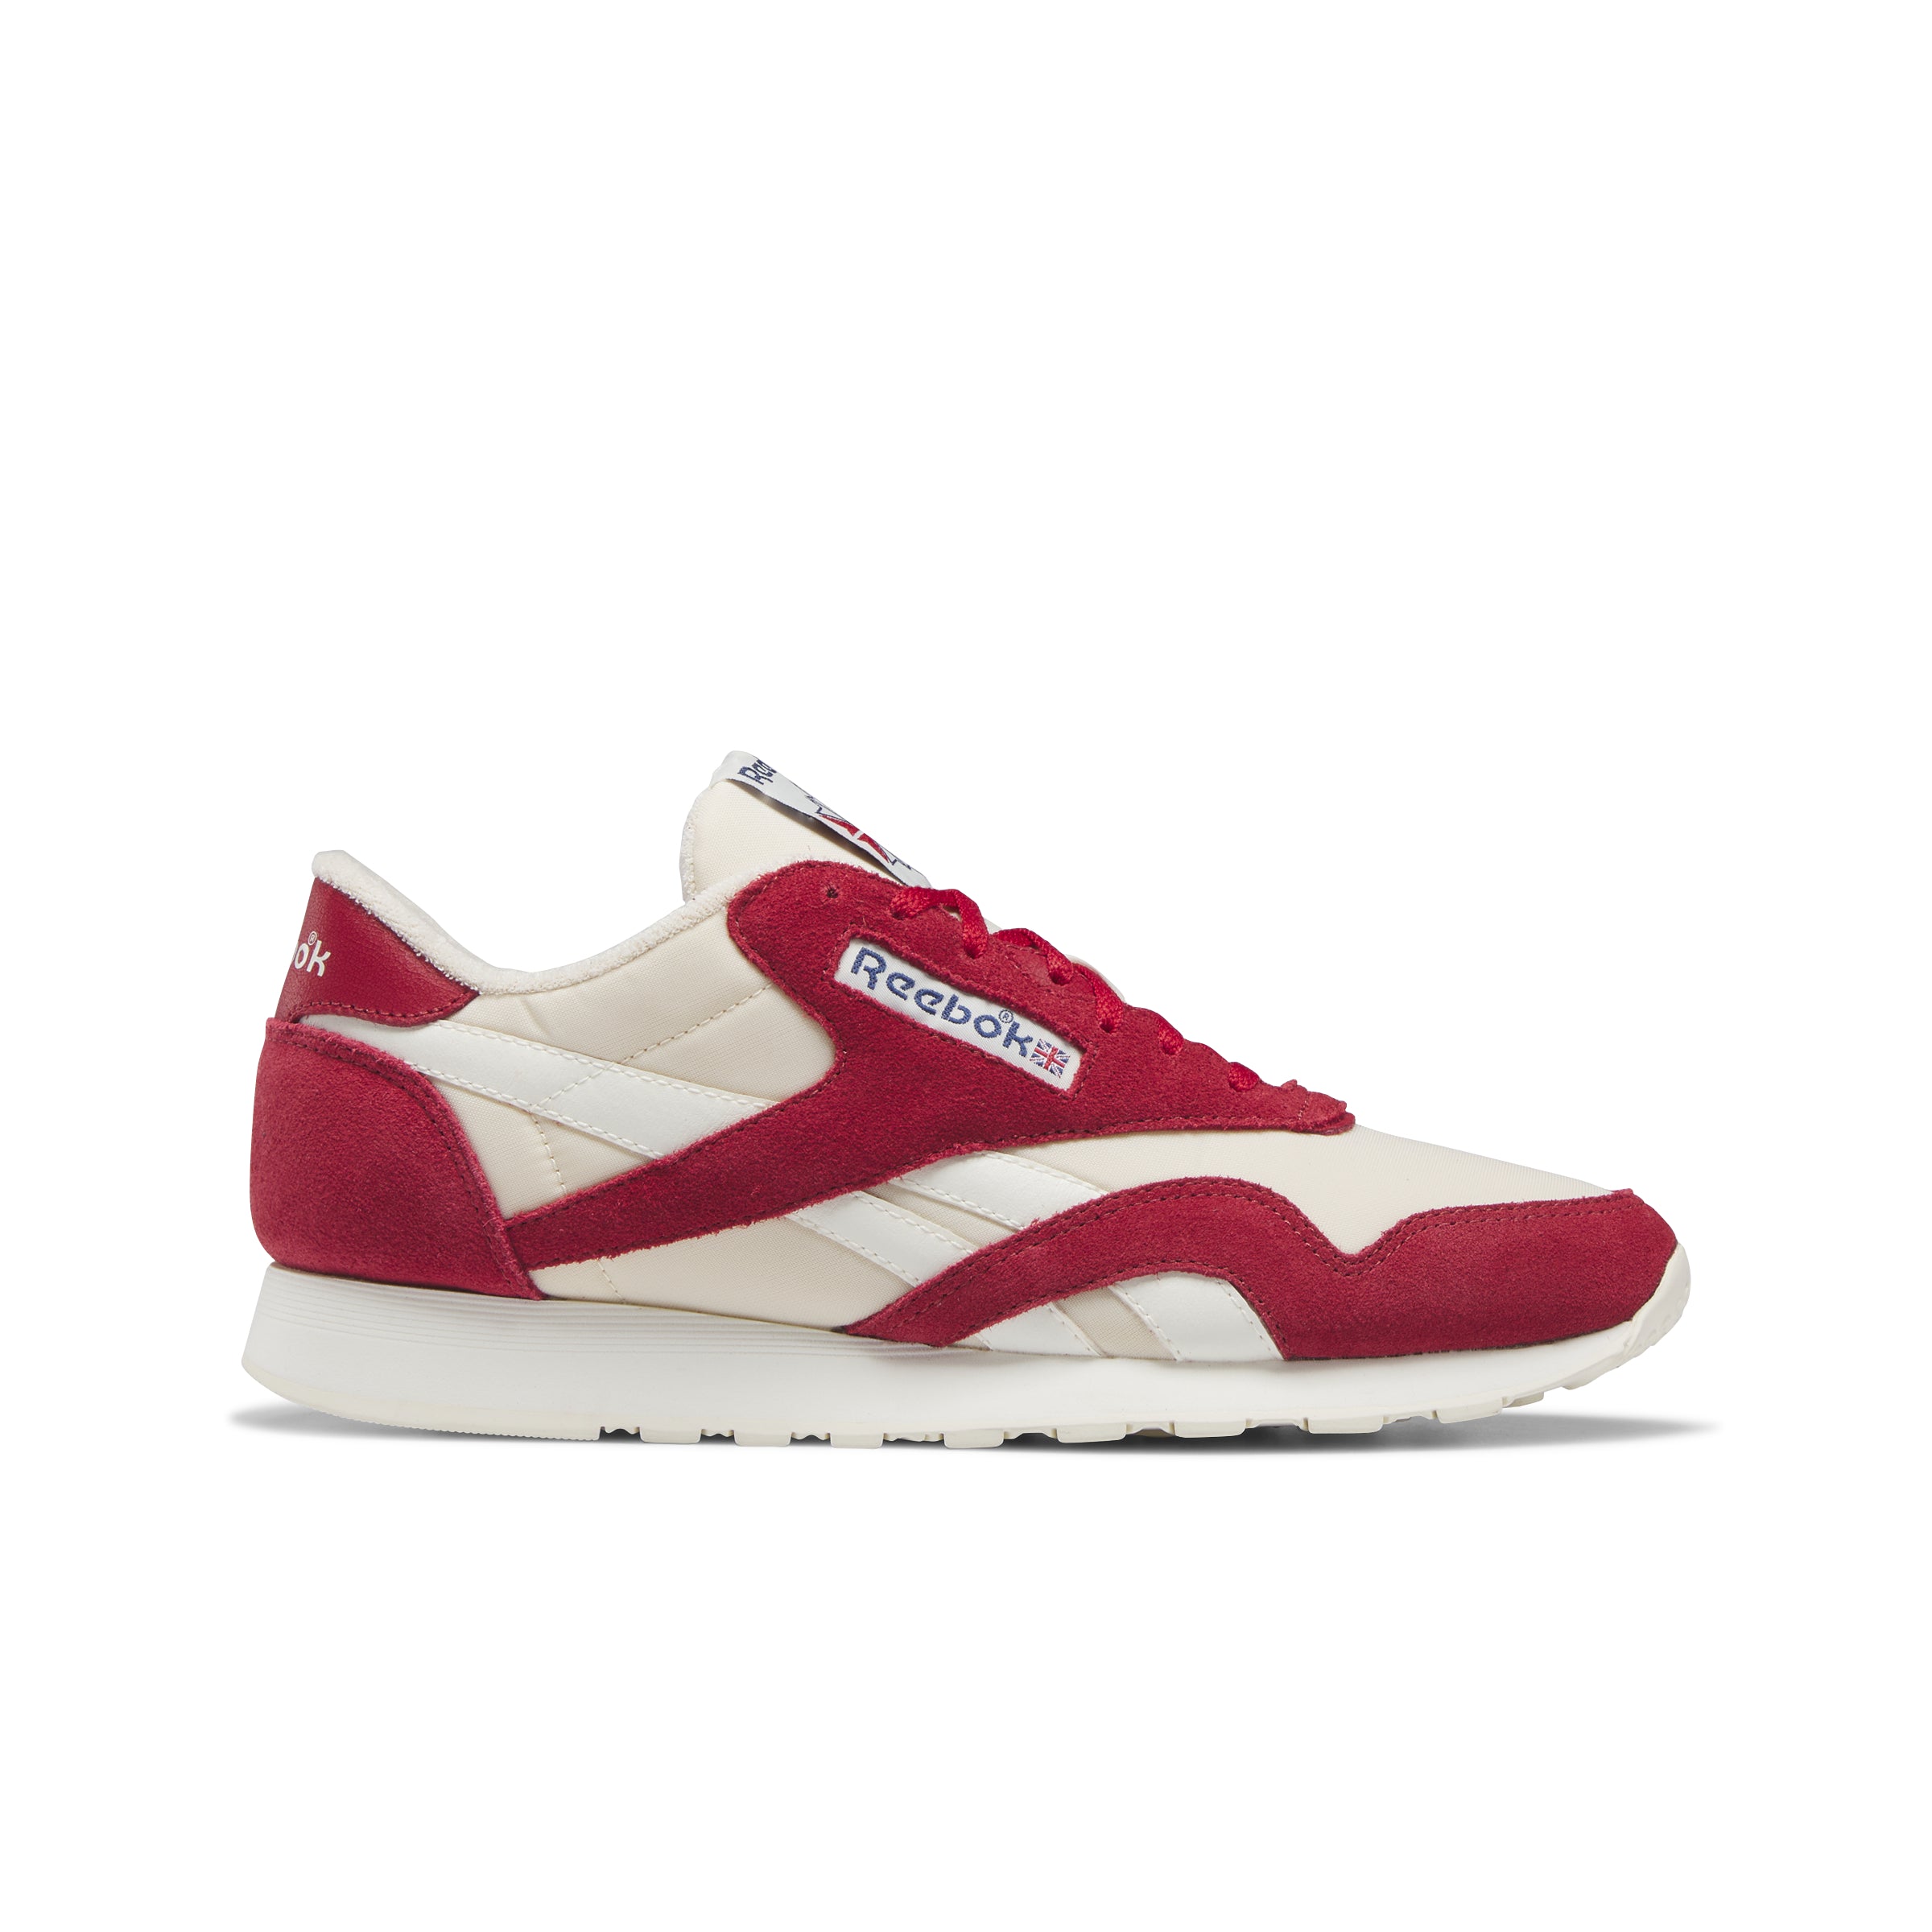 Notesbog Blive ved At interagere Reebok Tennis Shoes - Classic Nylon – InStyle-Tuscaloosa